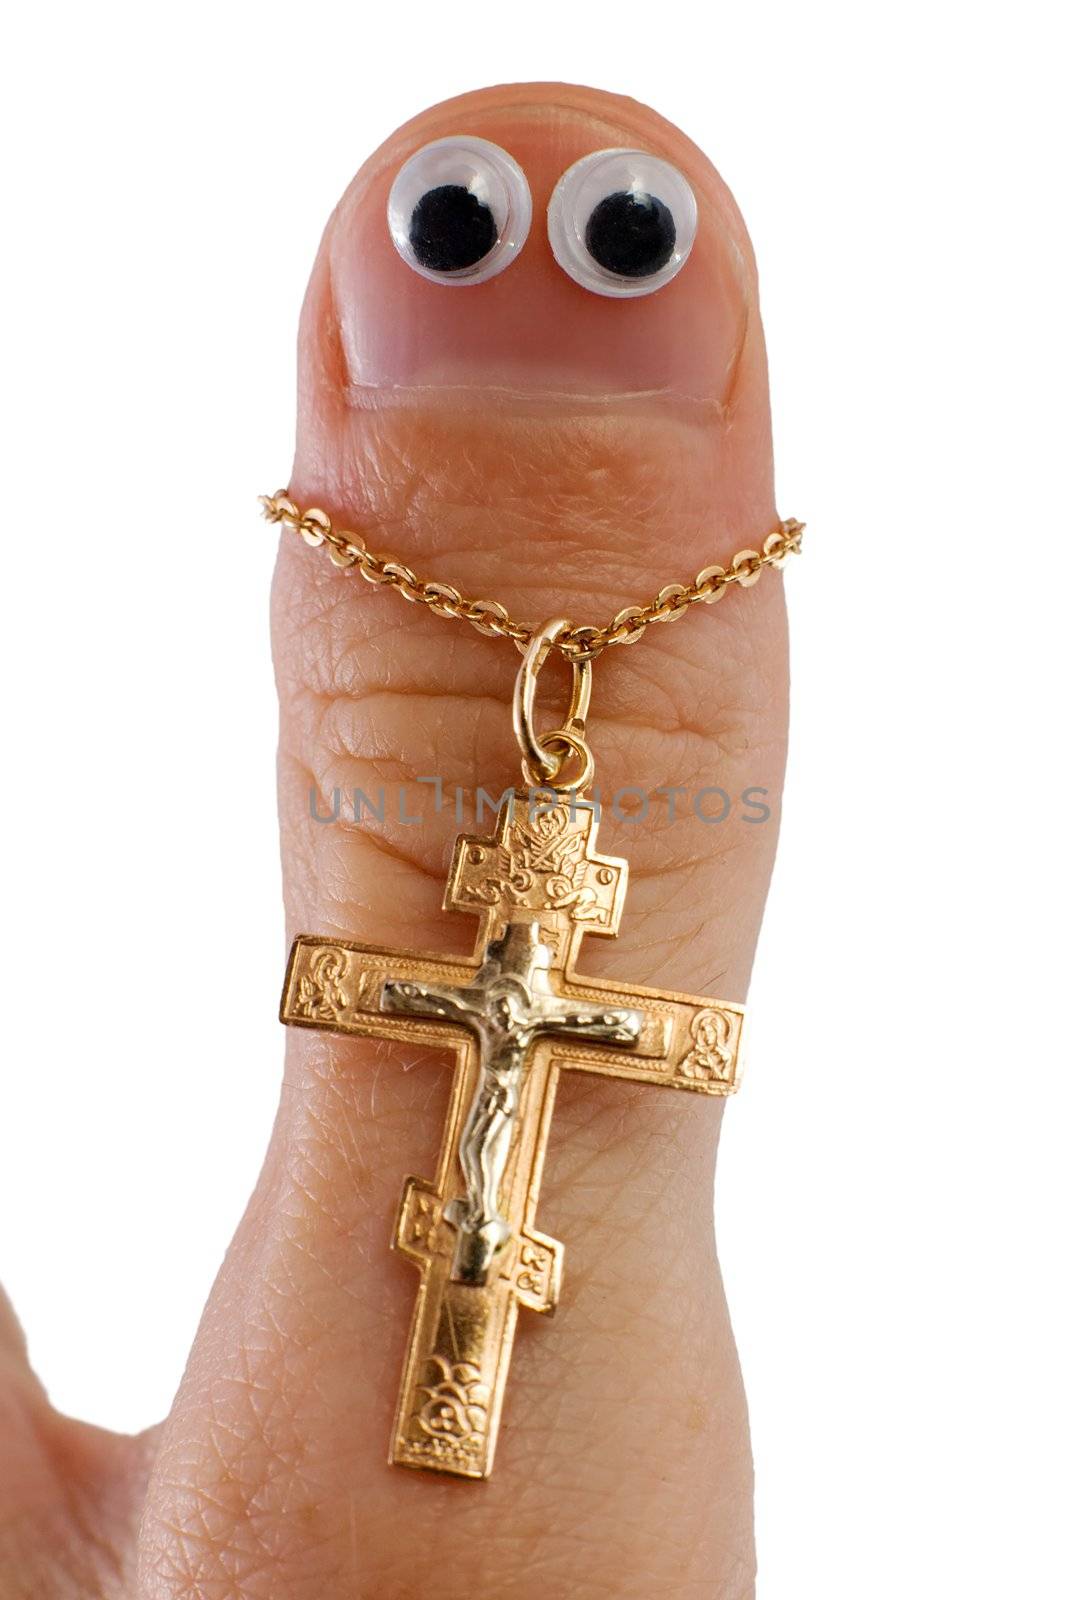 Finger with doll eyes and a cross